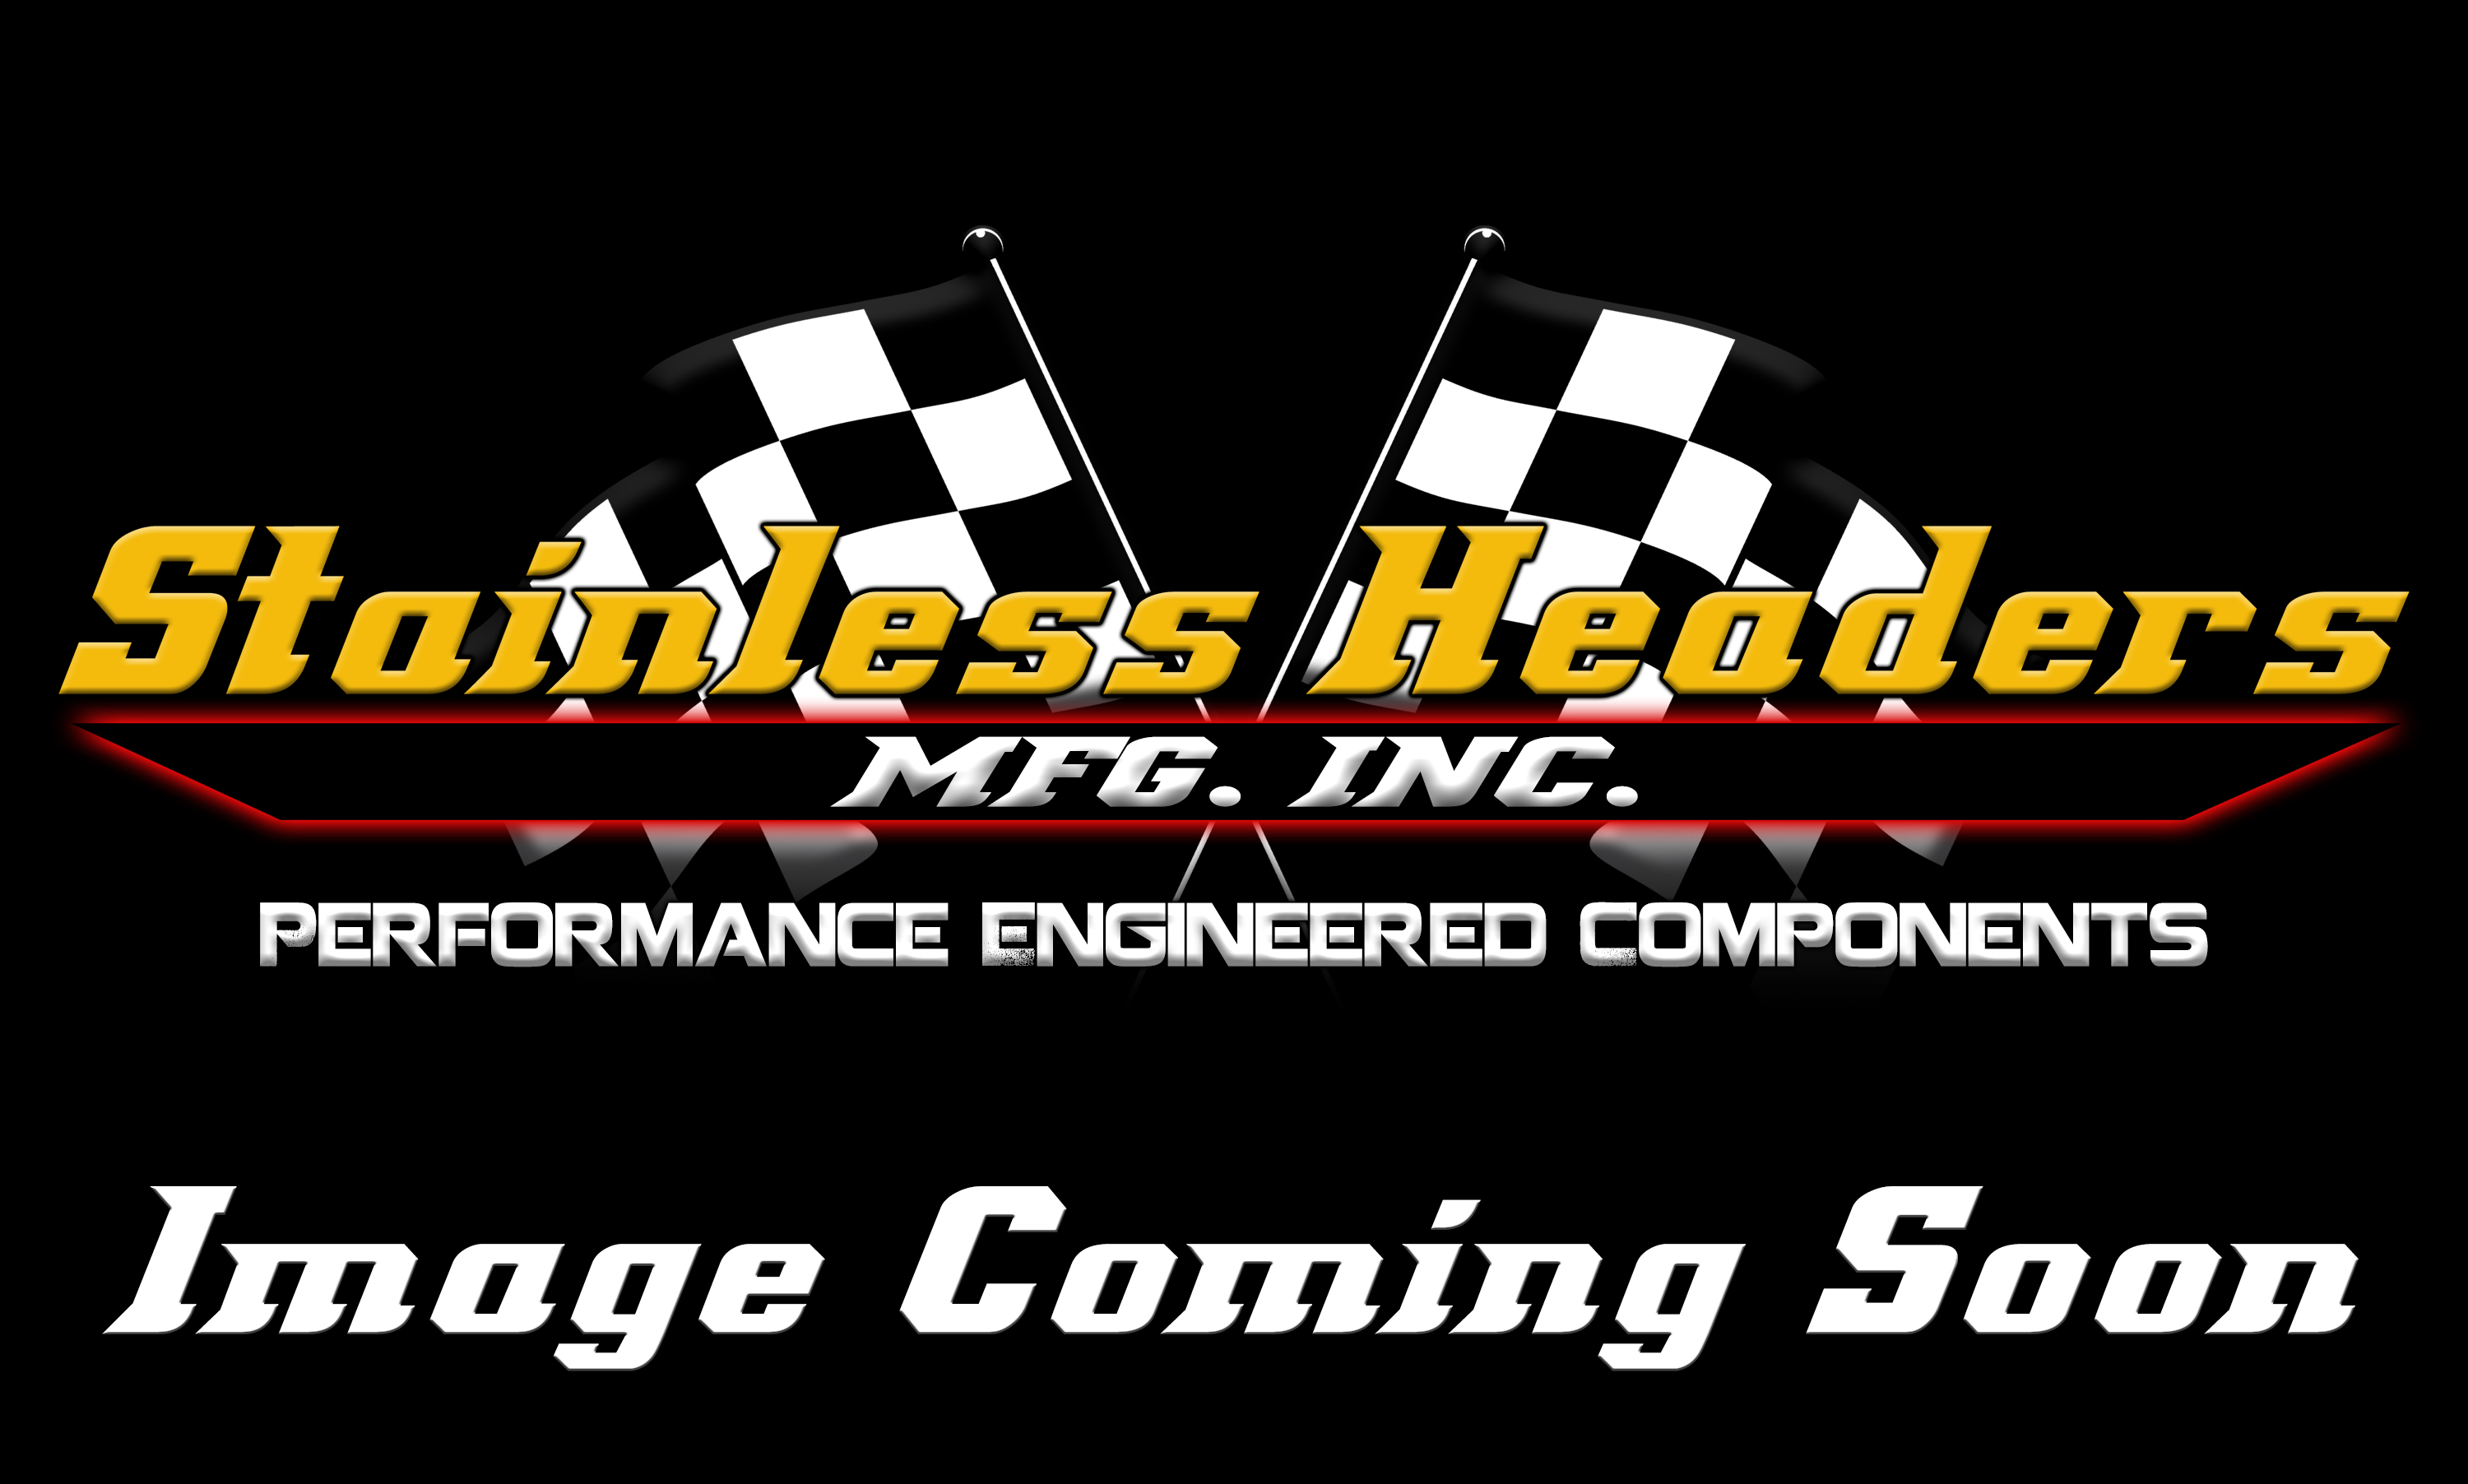 Stainless Headers - 2 1/2" Primary 4 into 1 Performance Merge Collector-18ga 321ss